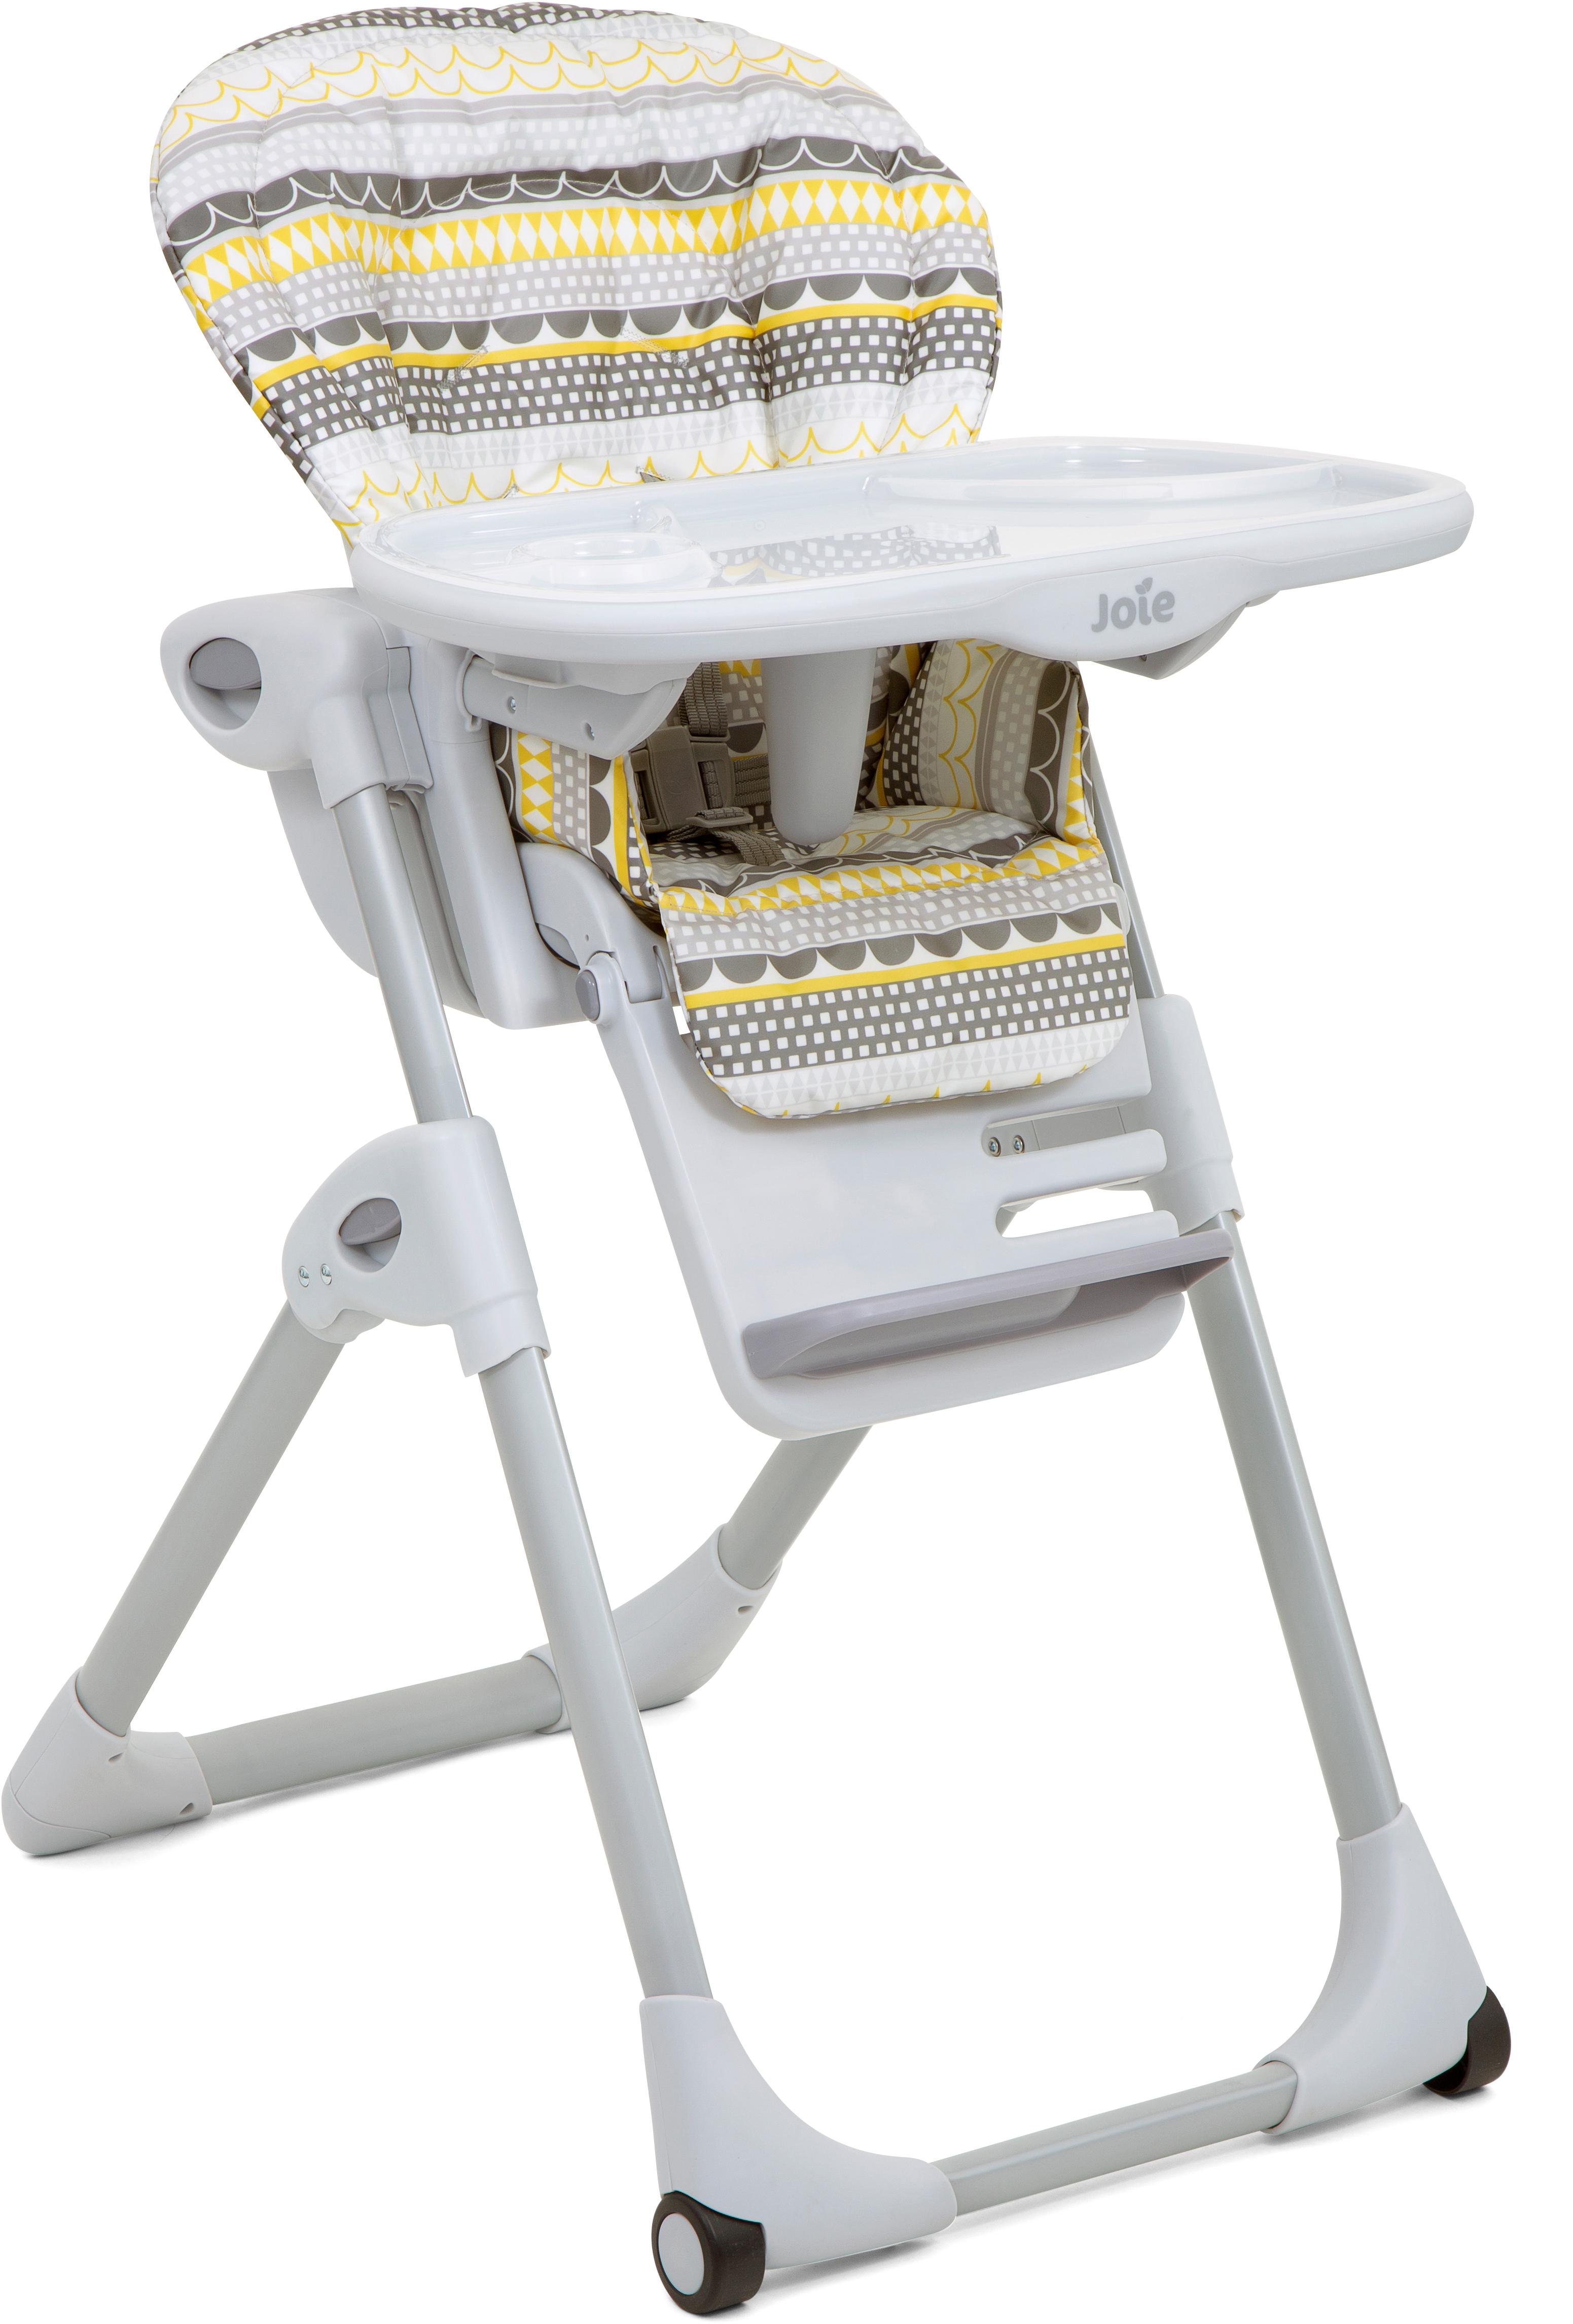 Joie Mimzy High Chair - Heydey